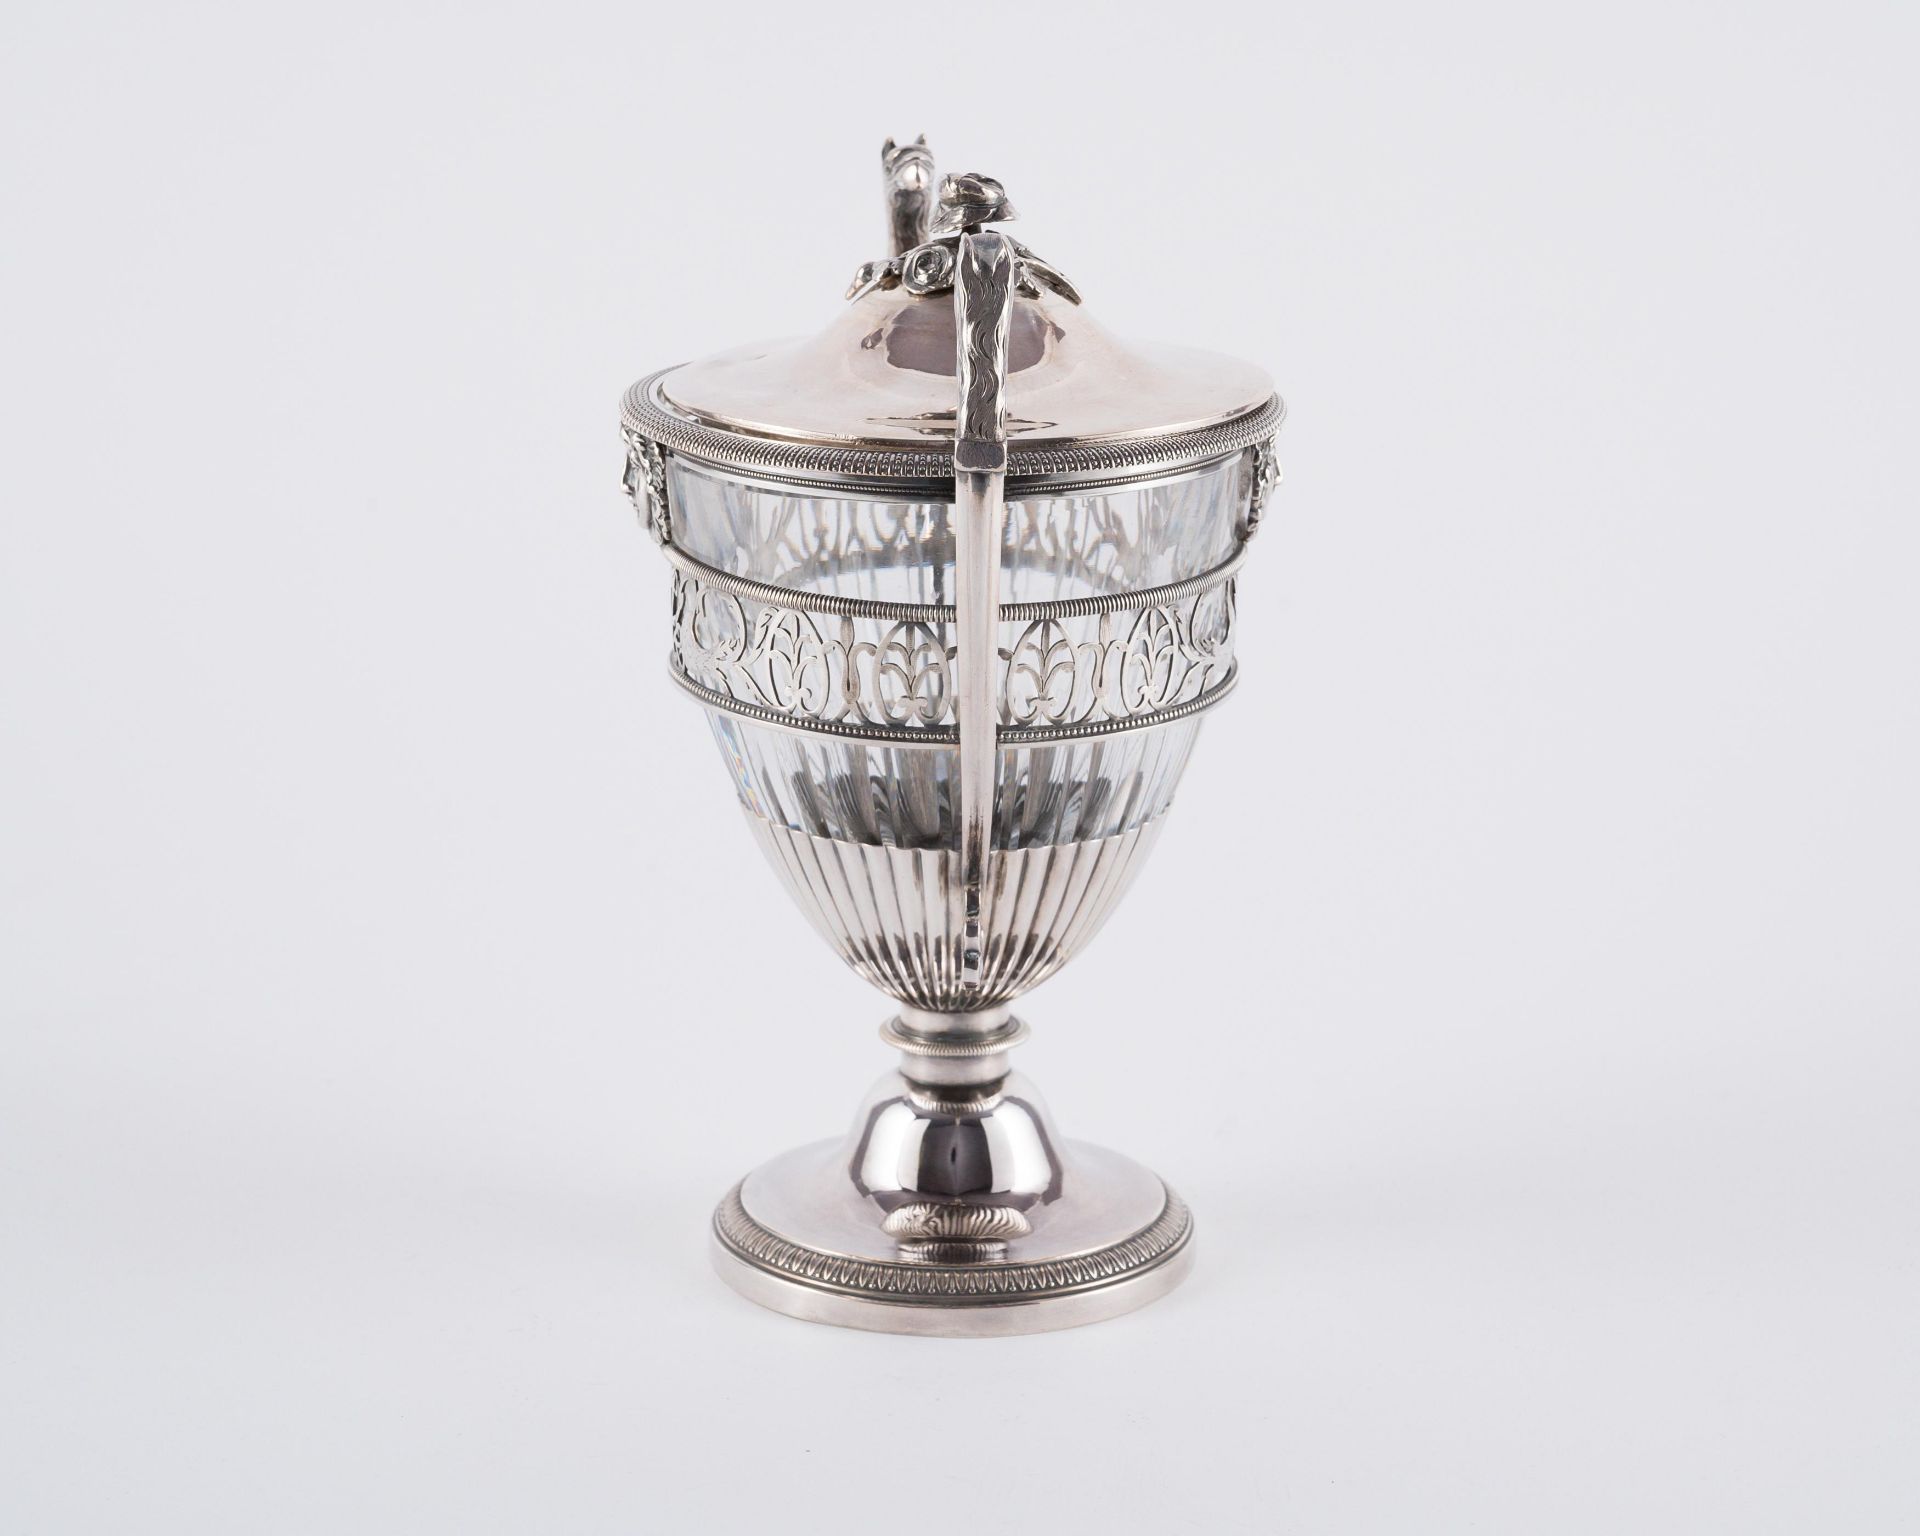 Nicolas-Richard Masson: FOOTED-SILVER SUGAR VESSEL WITH MASCARONS - Image 4 of 6